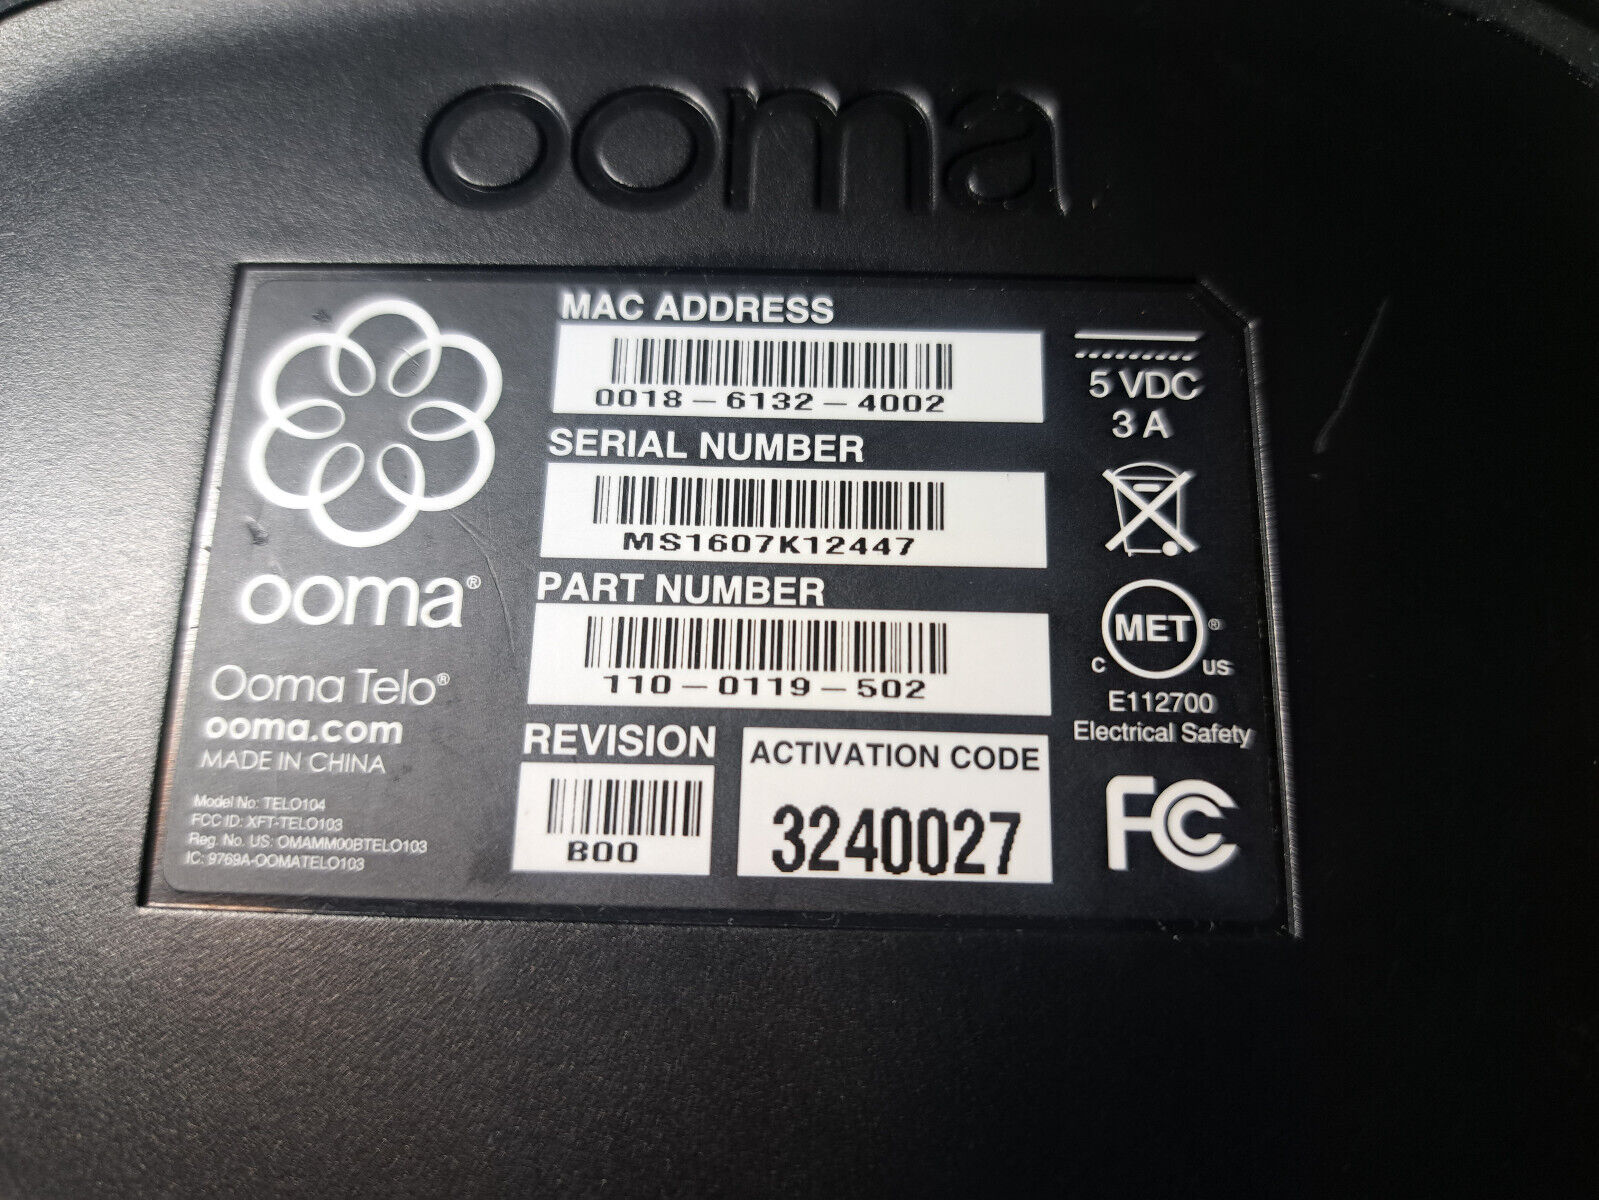 OOMA VOIP Telephone Base Unit with Power Adapter